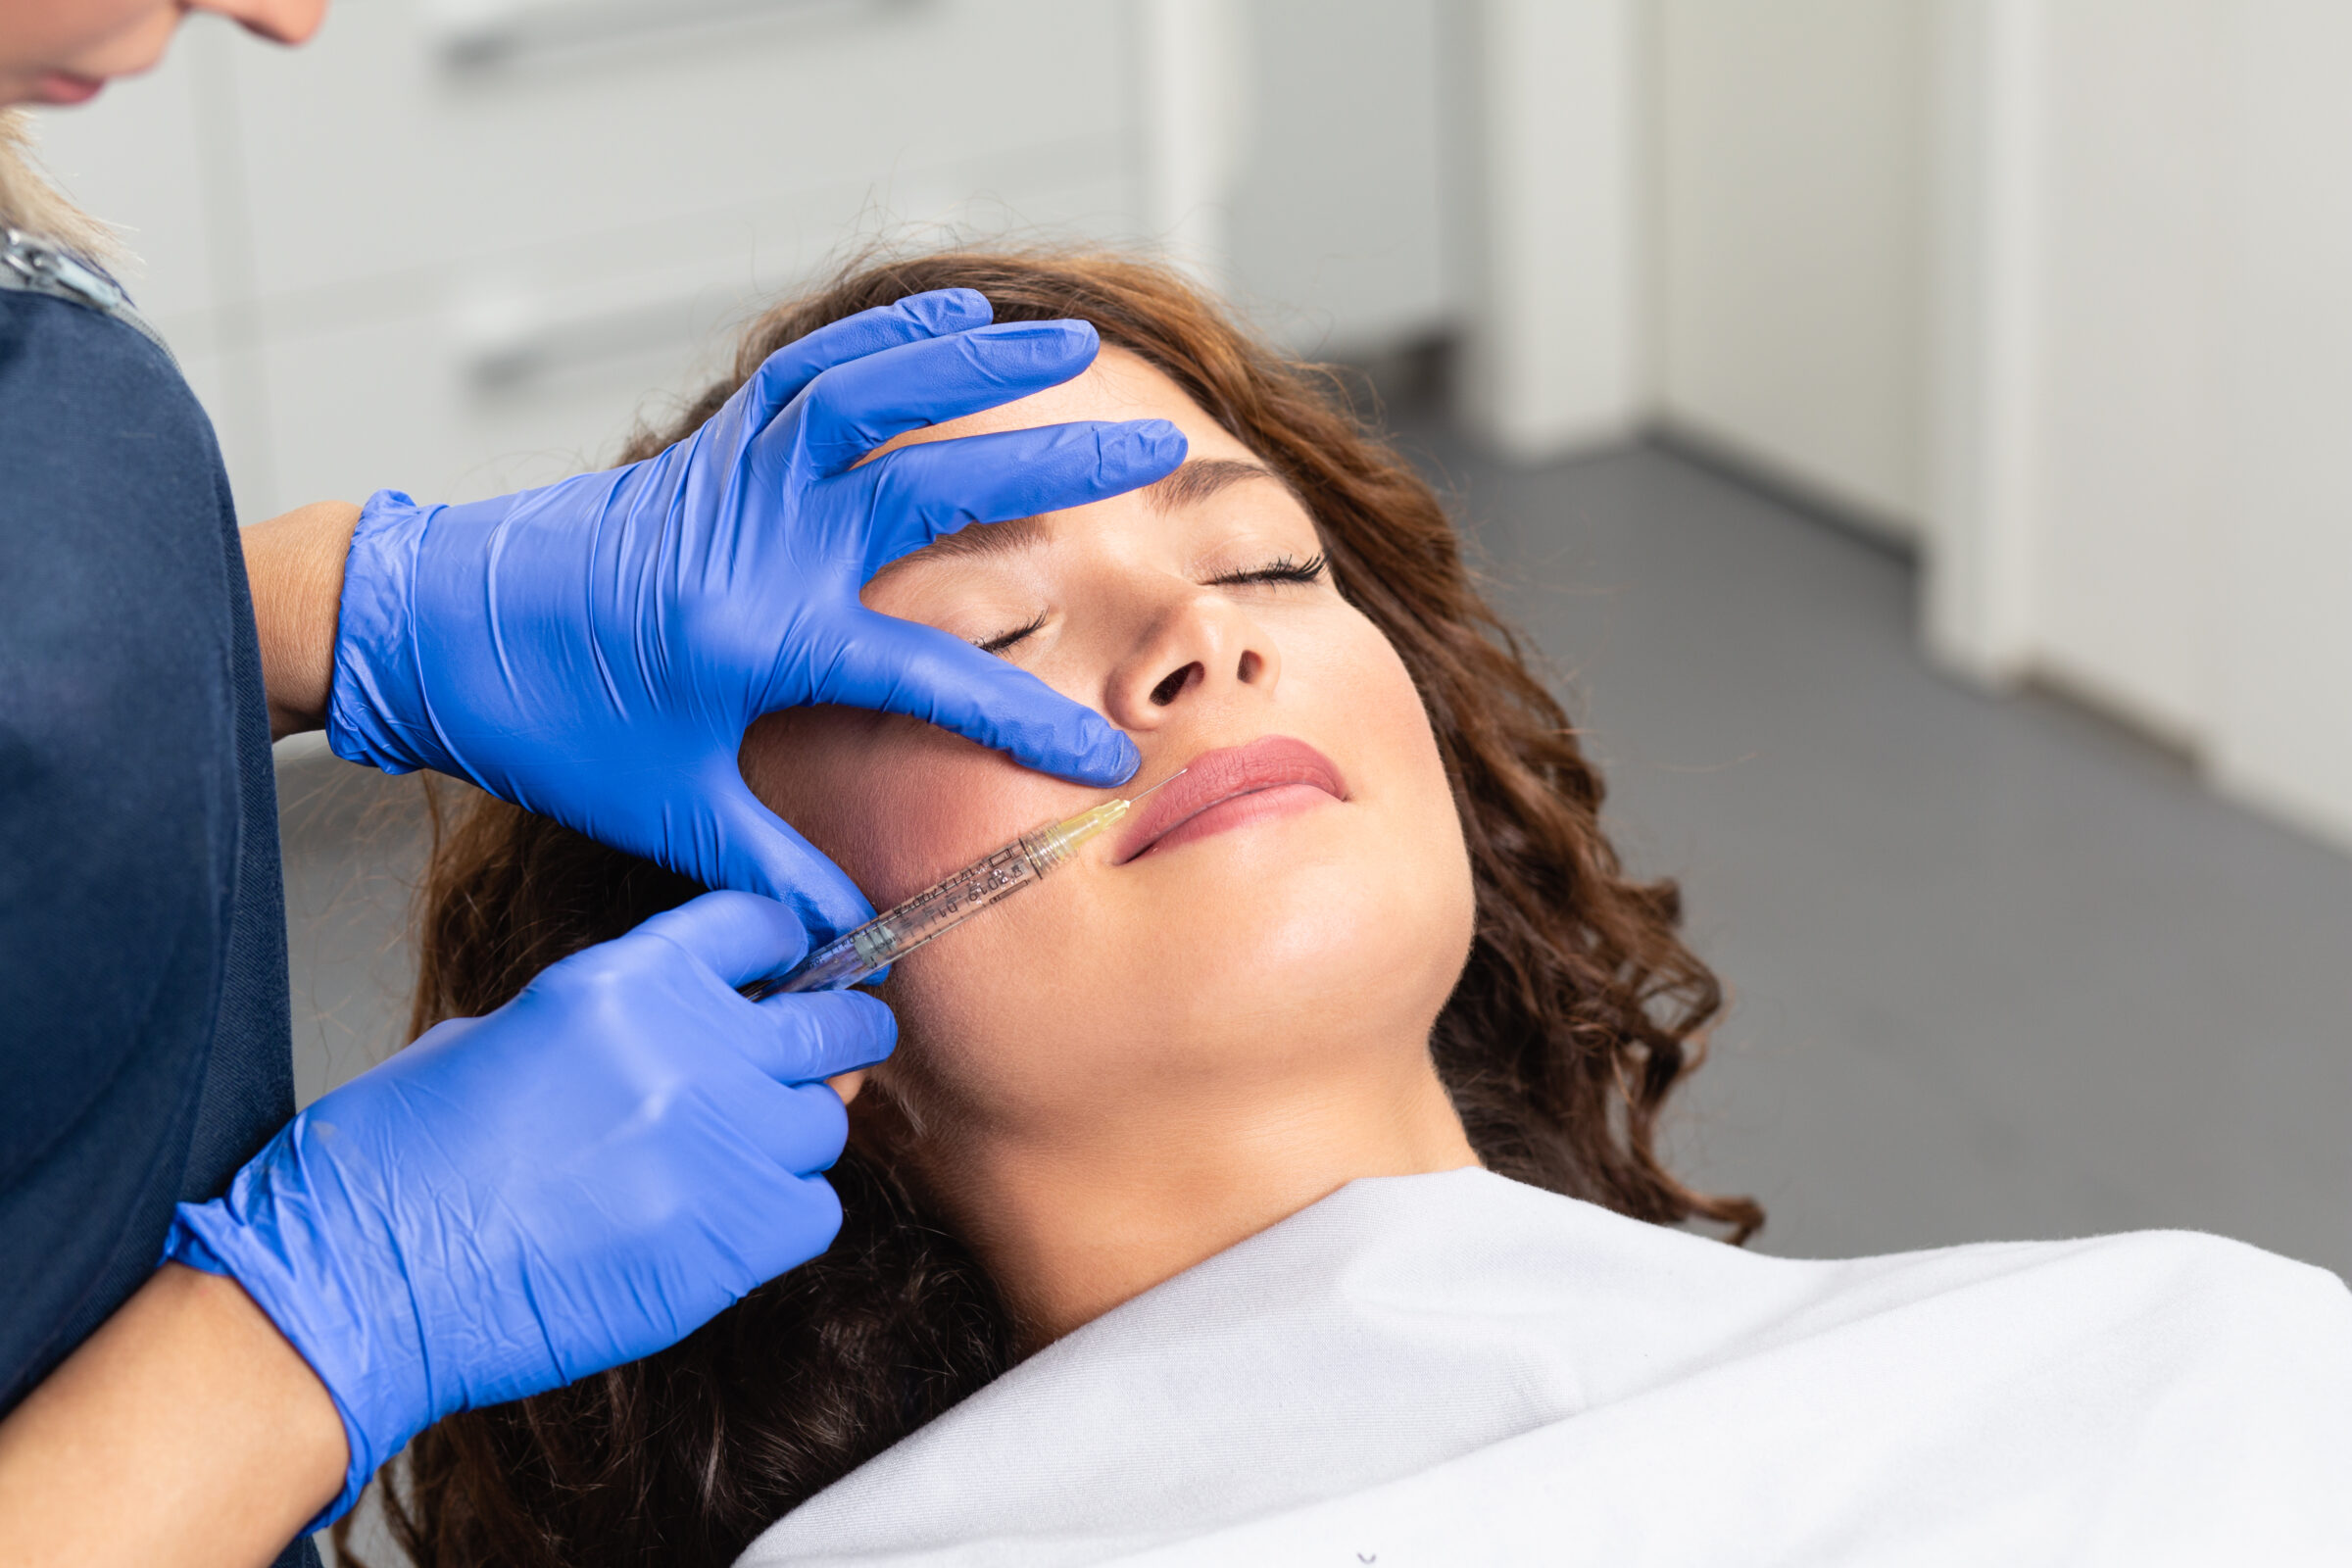 A brunette woman getting a botox injection in her face.